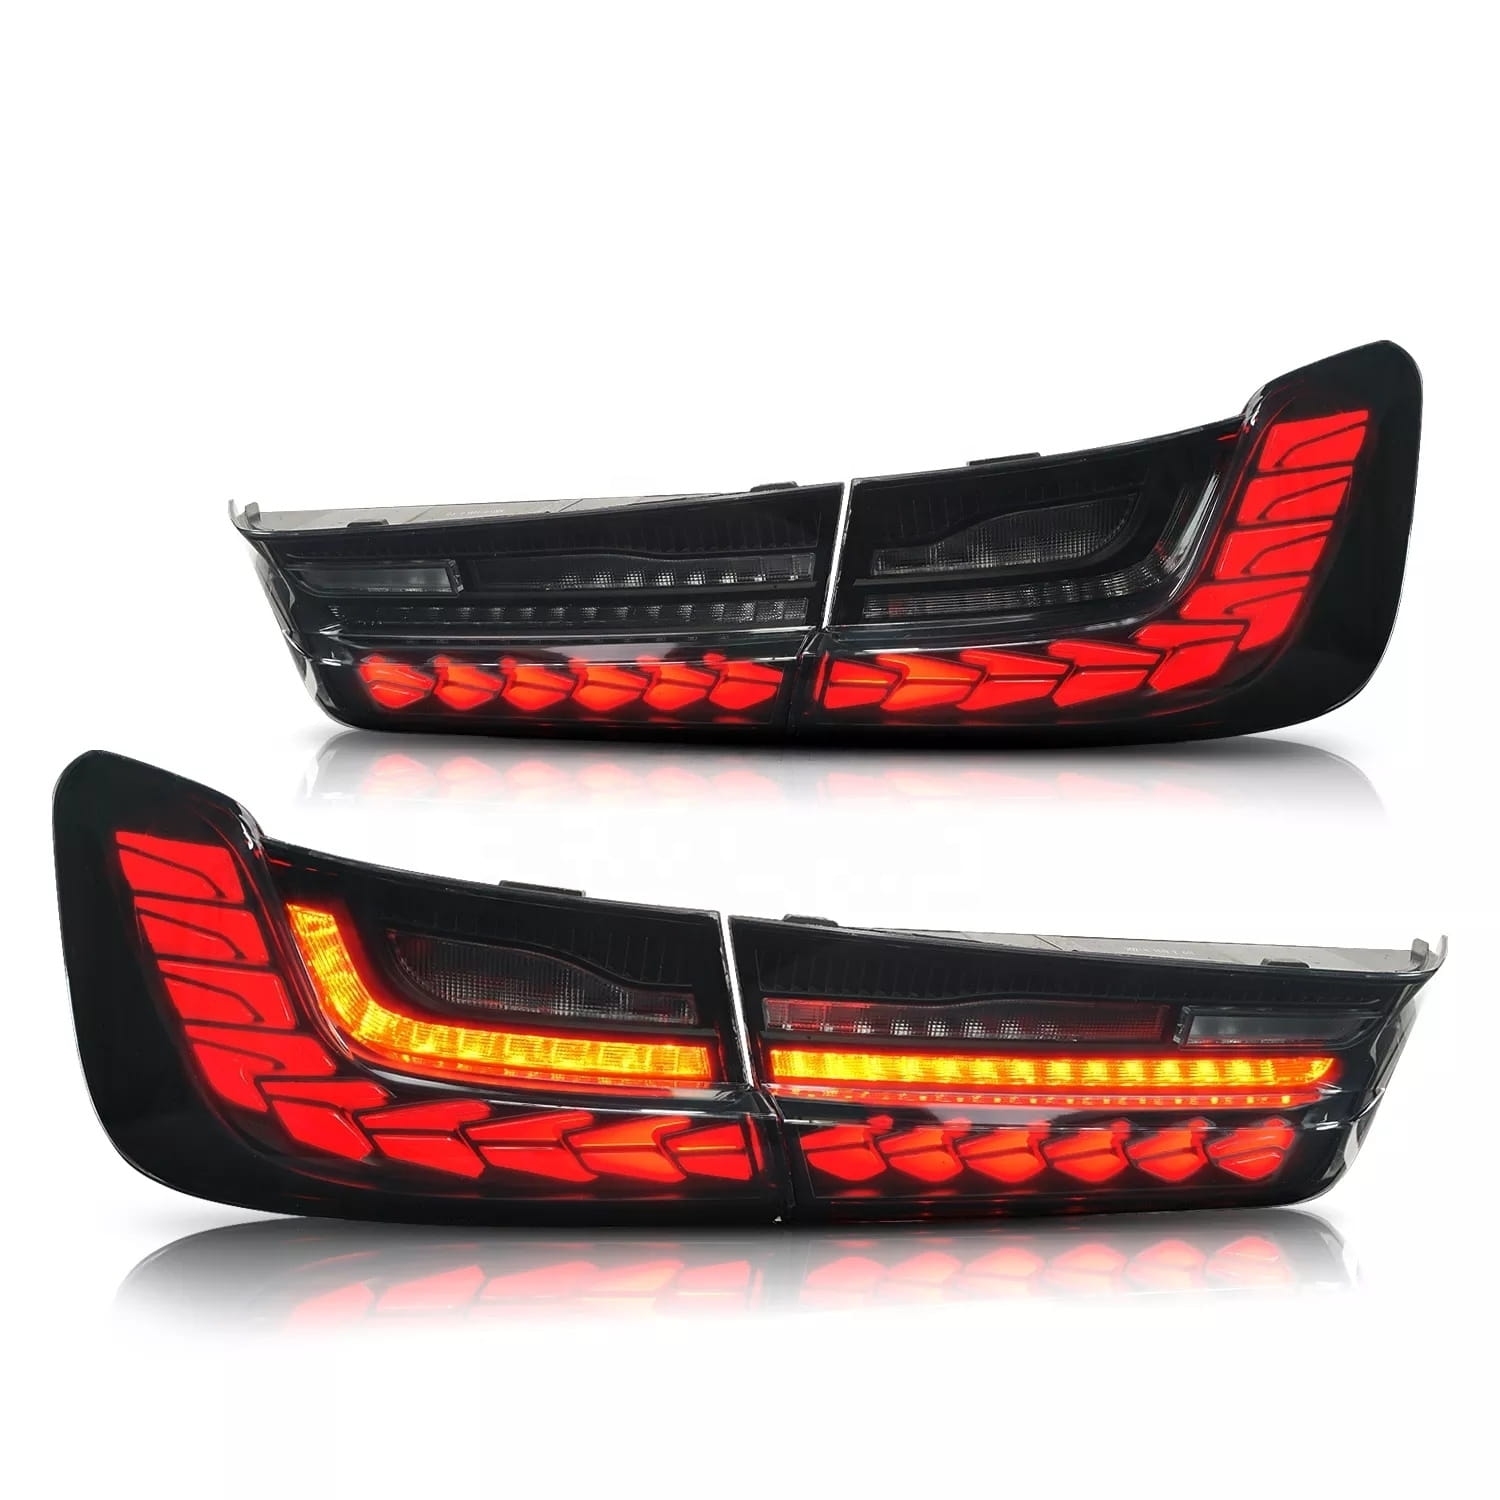 GTS Style OLED Tail Lights for G20 / G28 & G80 3 Series / M3 330i M340